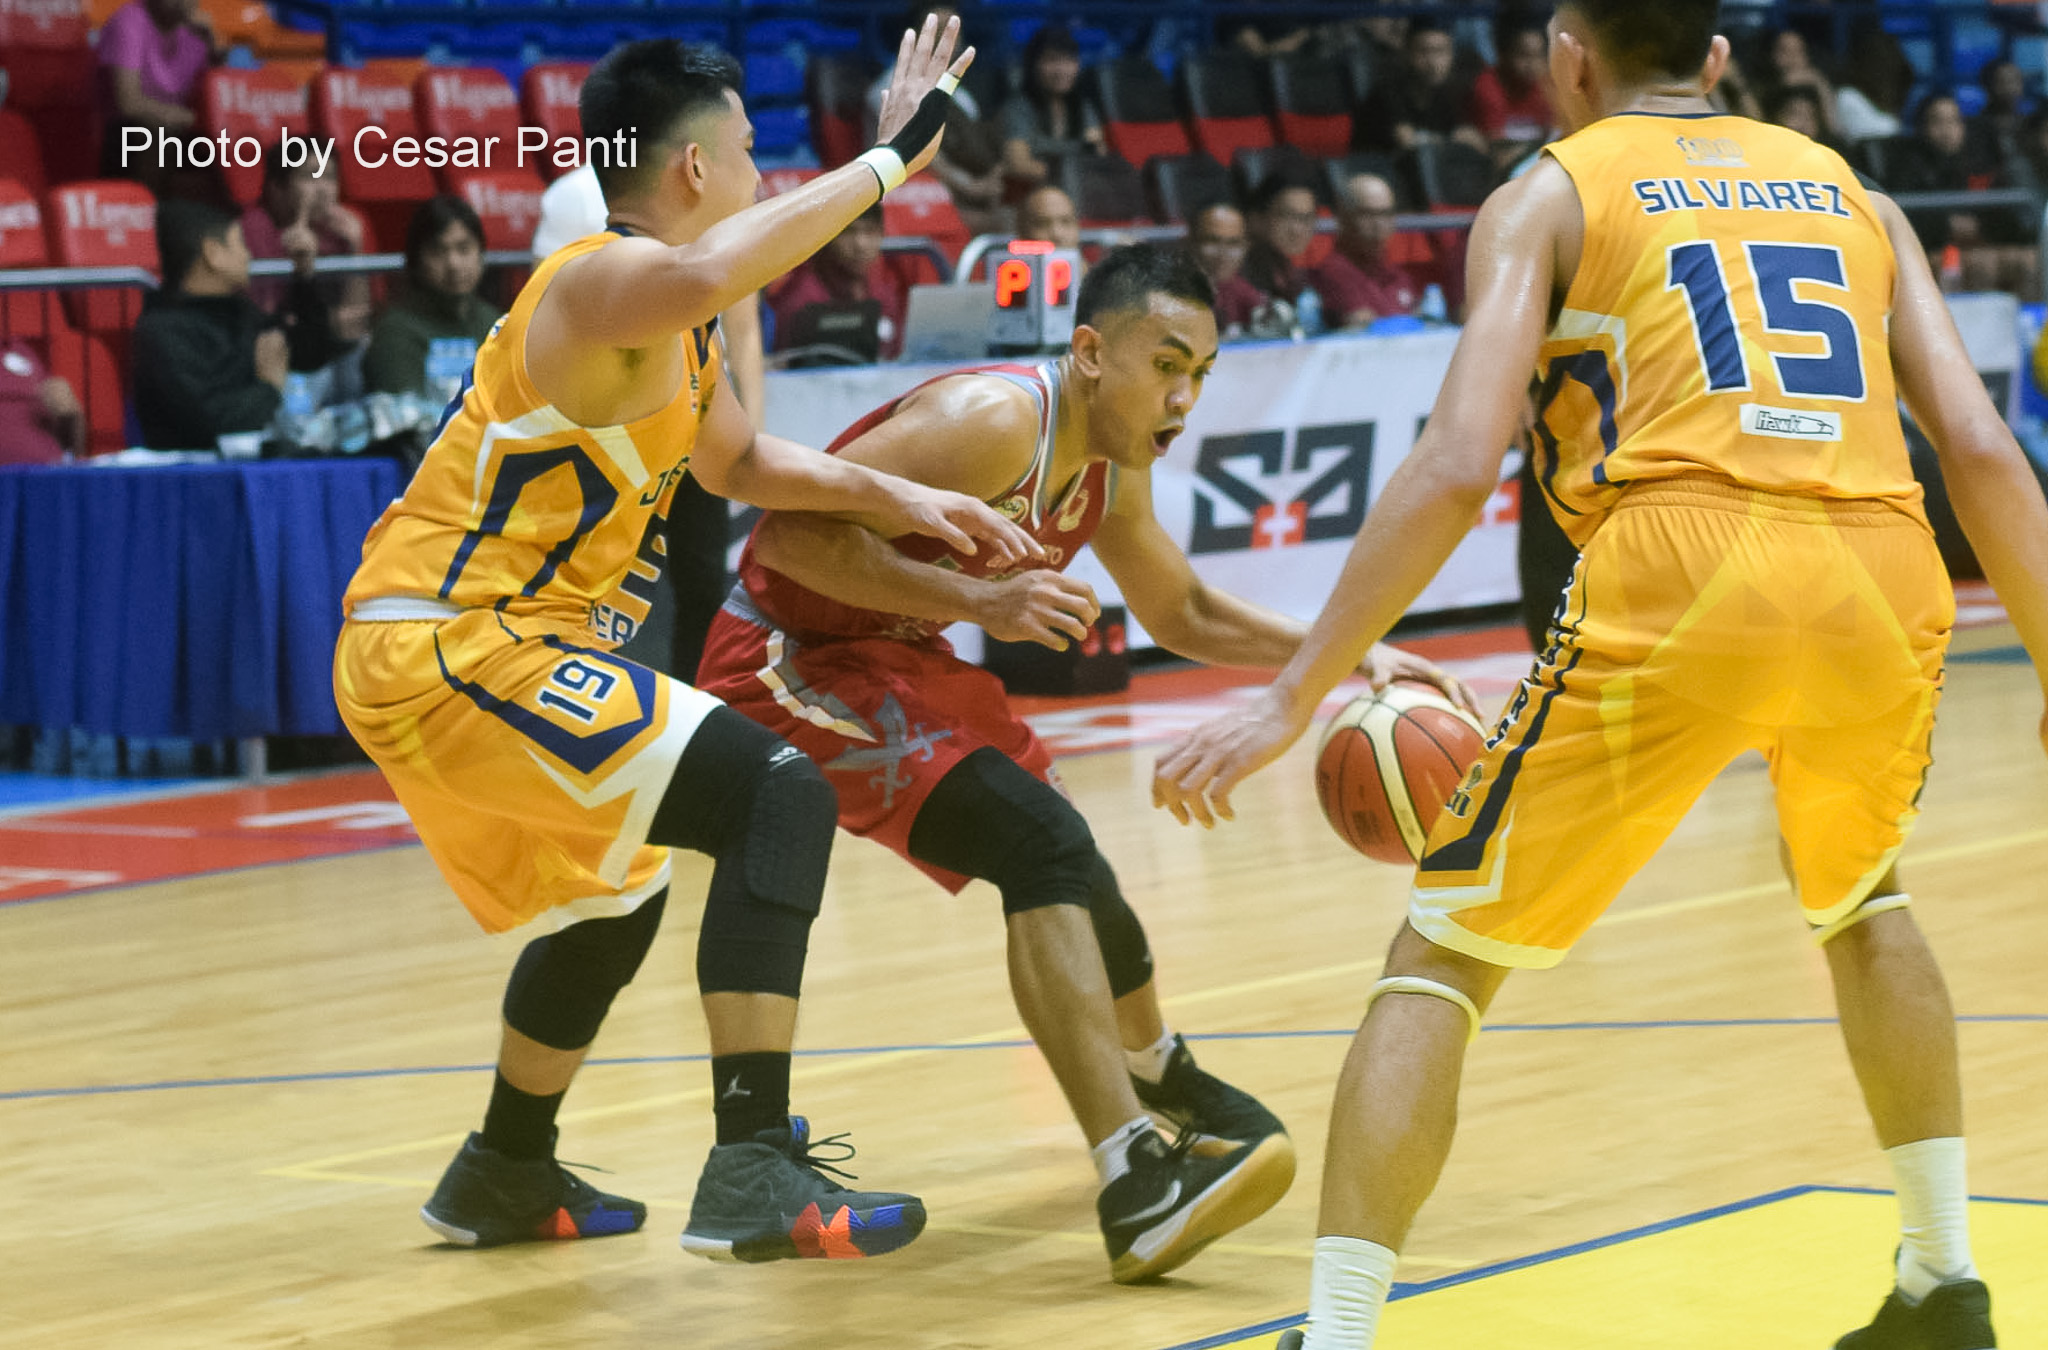 Lyceum escapes JRU, keeps perfect record